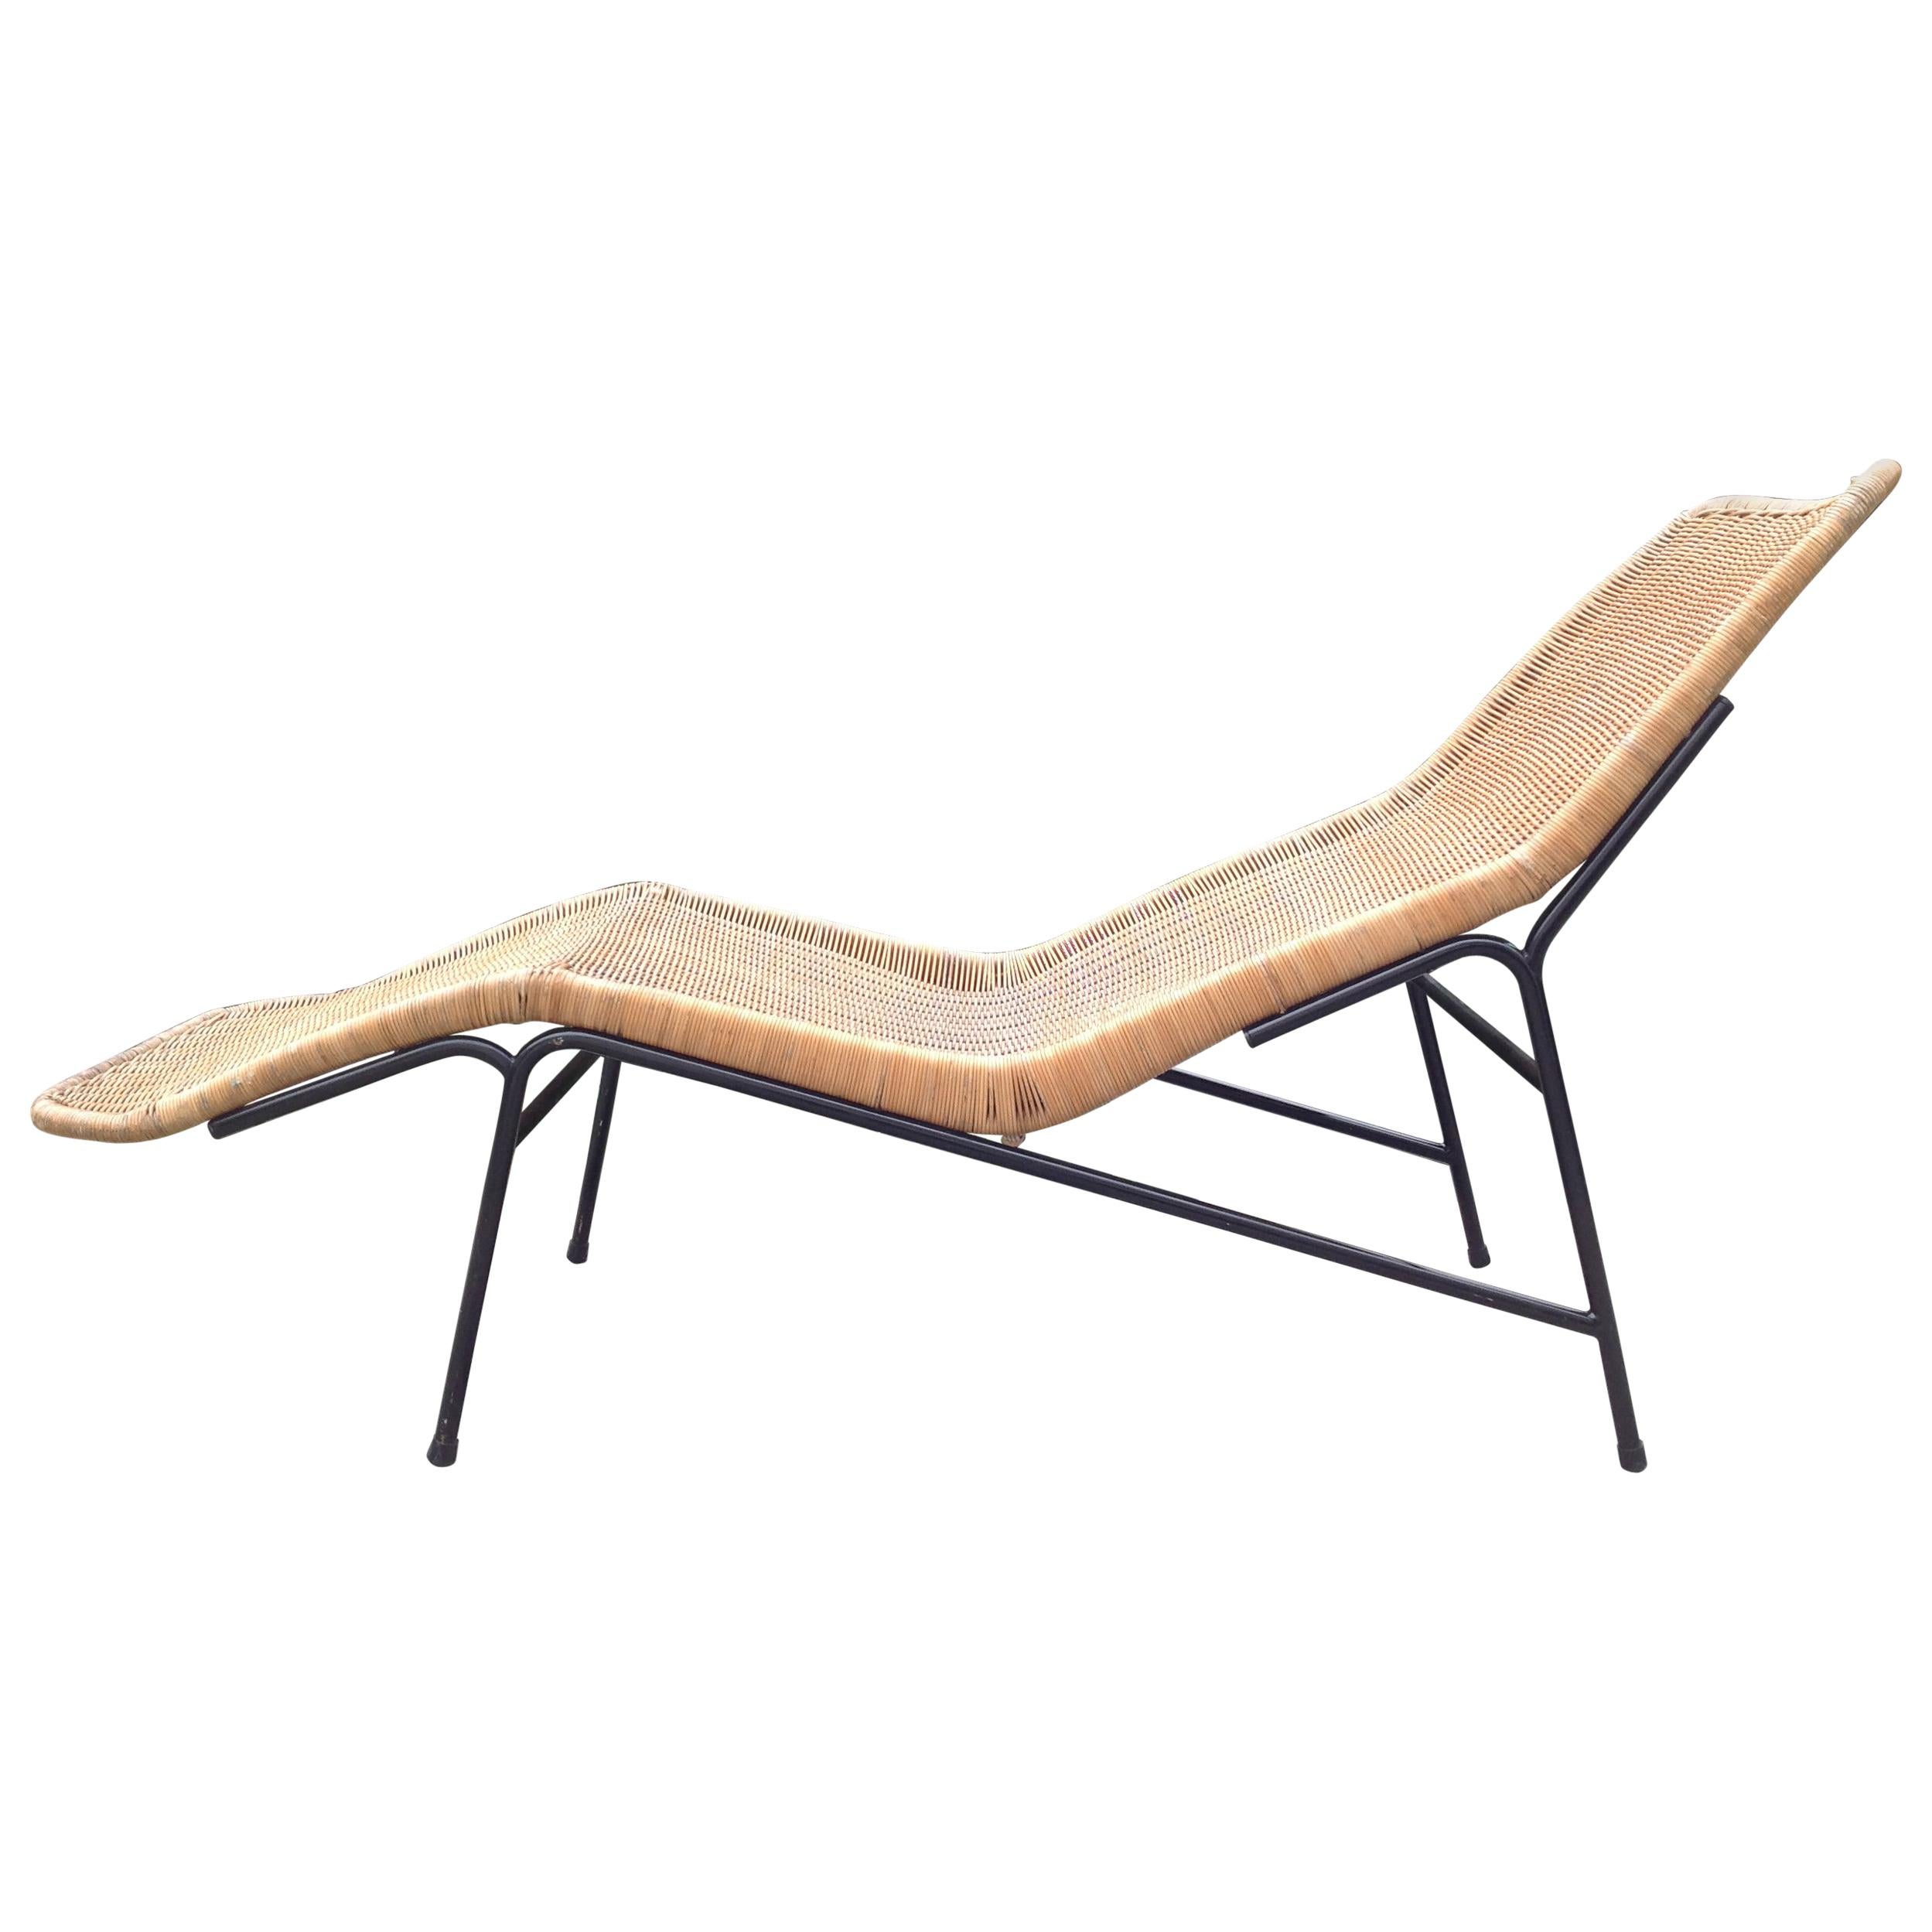 Chaise Longue in Cane, Wicker, Design by Dirk Van Sliedrecht for Rohé, 1960s For Sale